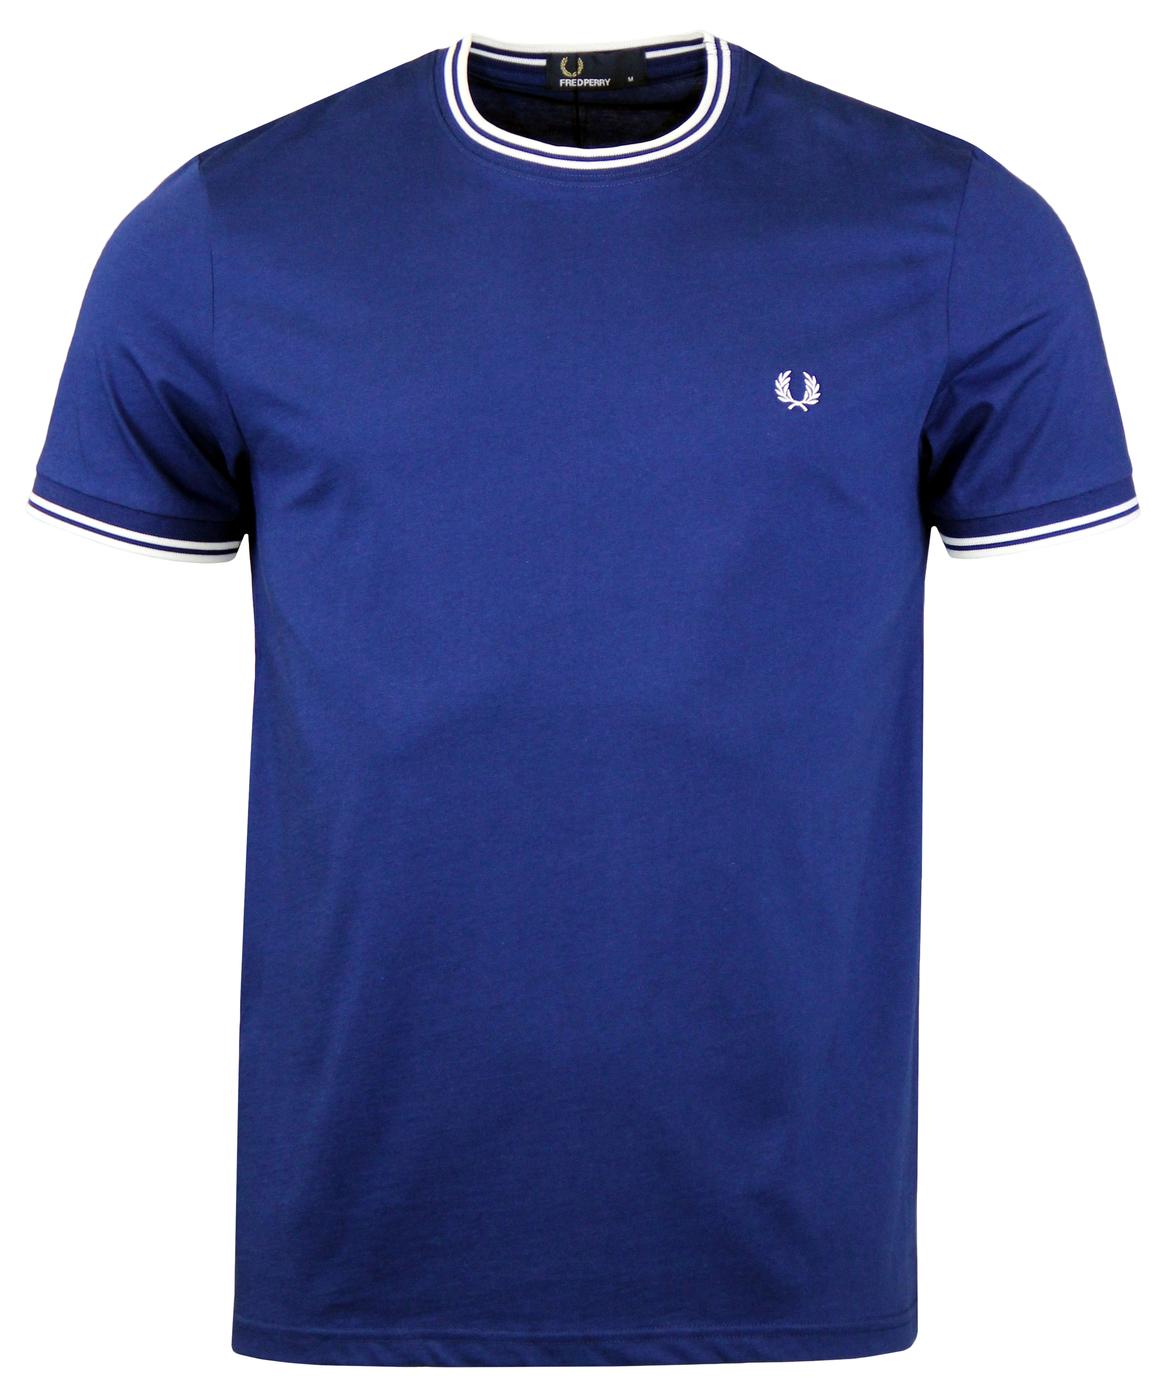 FRED PERRY Retro Mod Twin Tipped Crew Tee M. BLUE